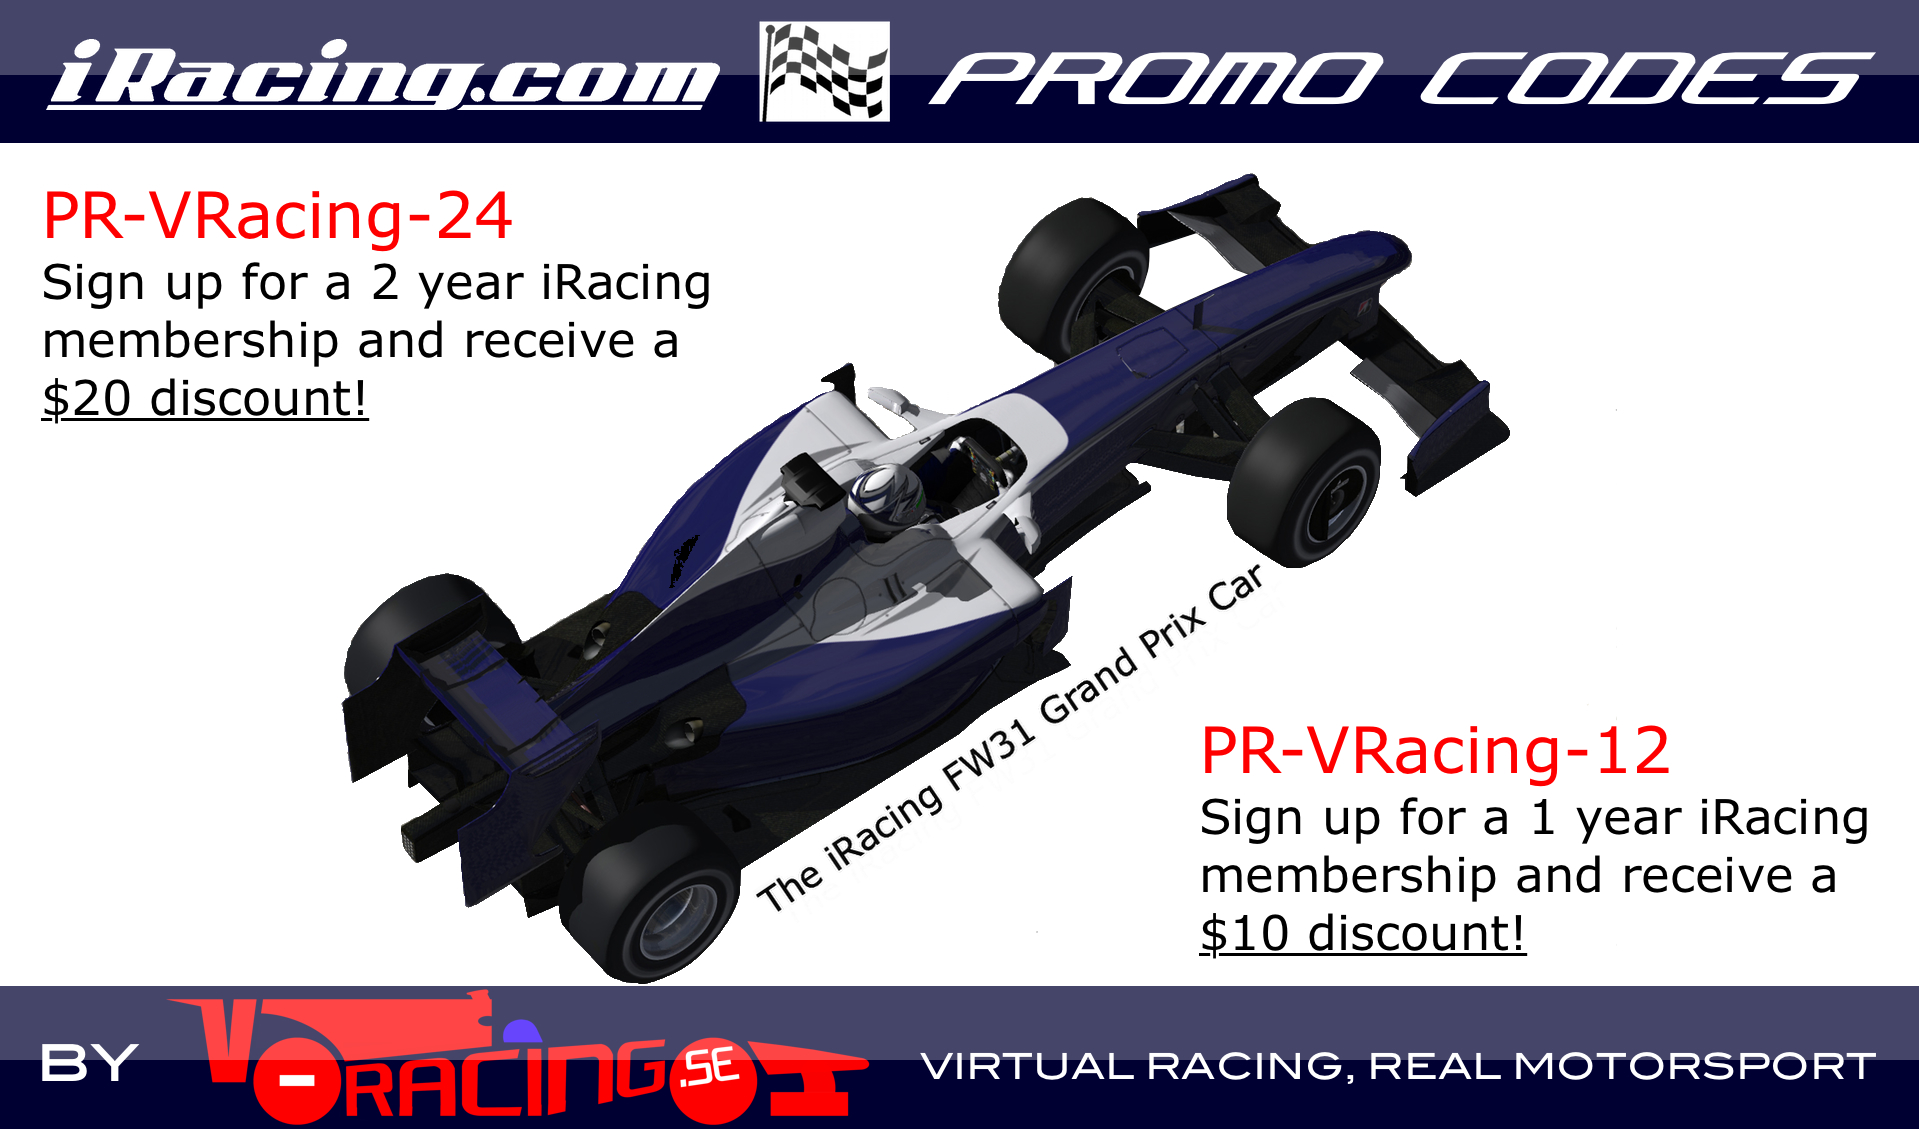 iRacing Promotion Codes by V-Racing.se